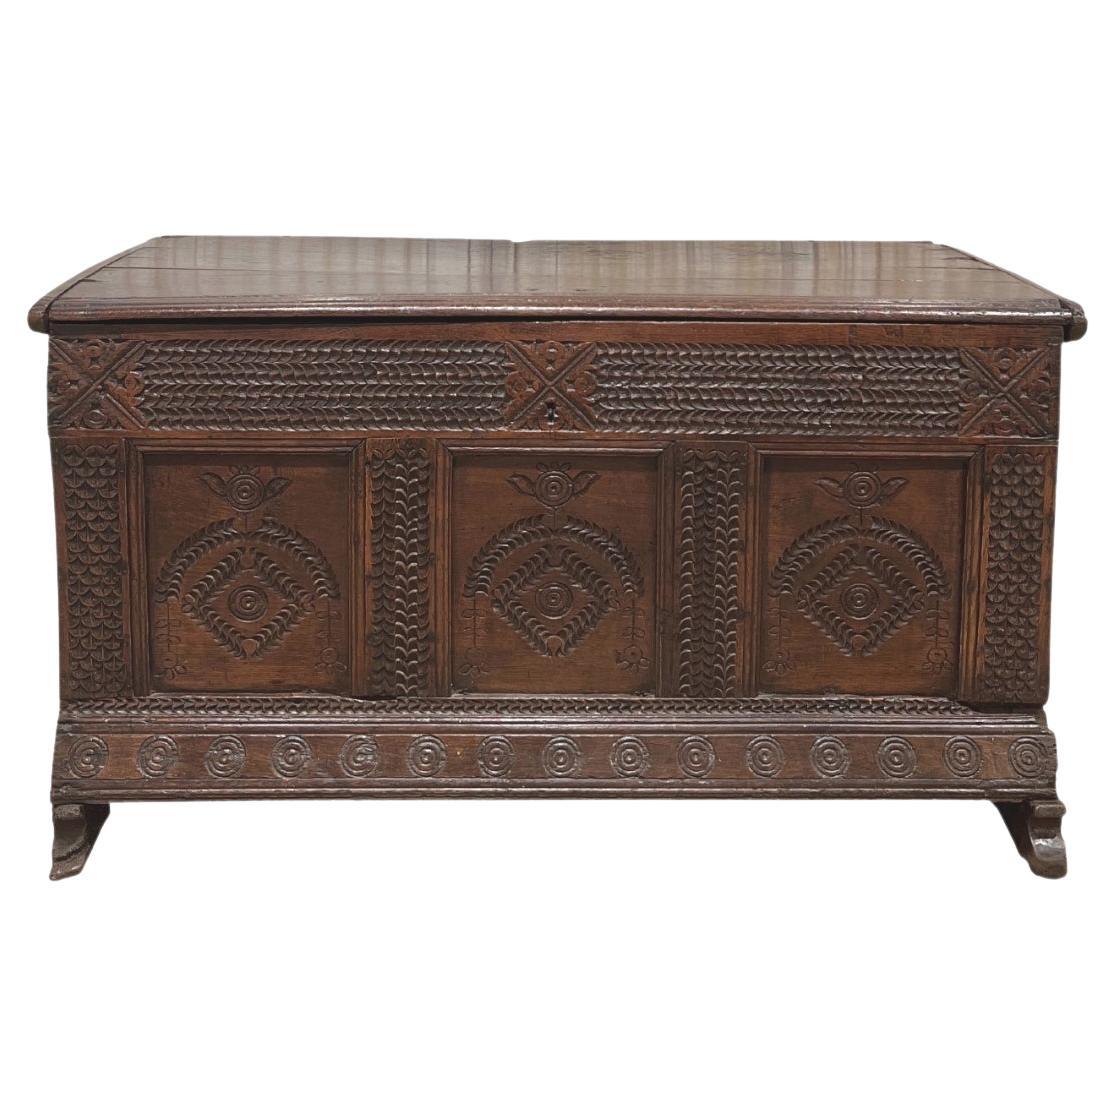 Mid-17th Century English Carved Oak Blanket Chest For Sale